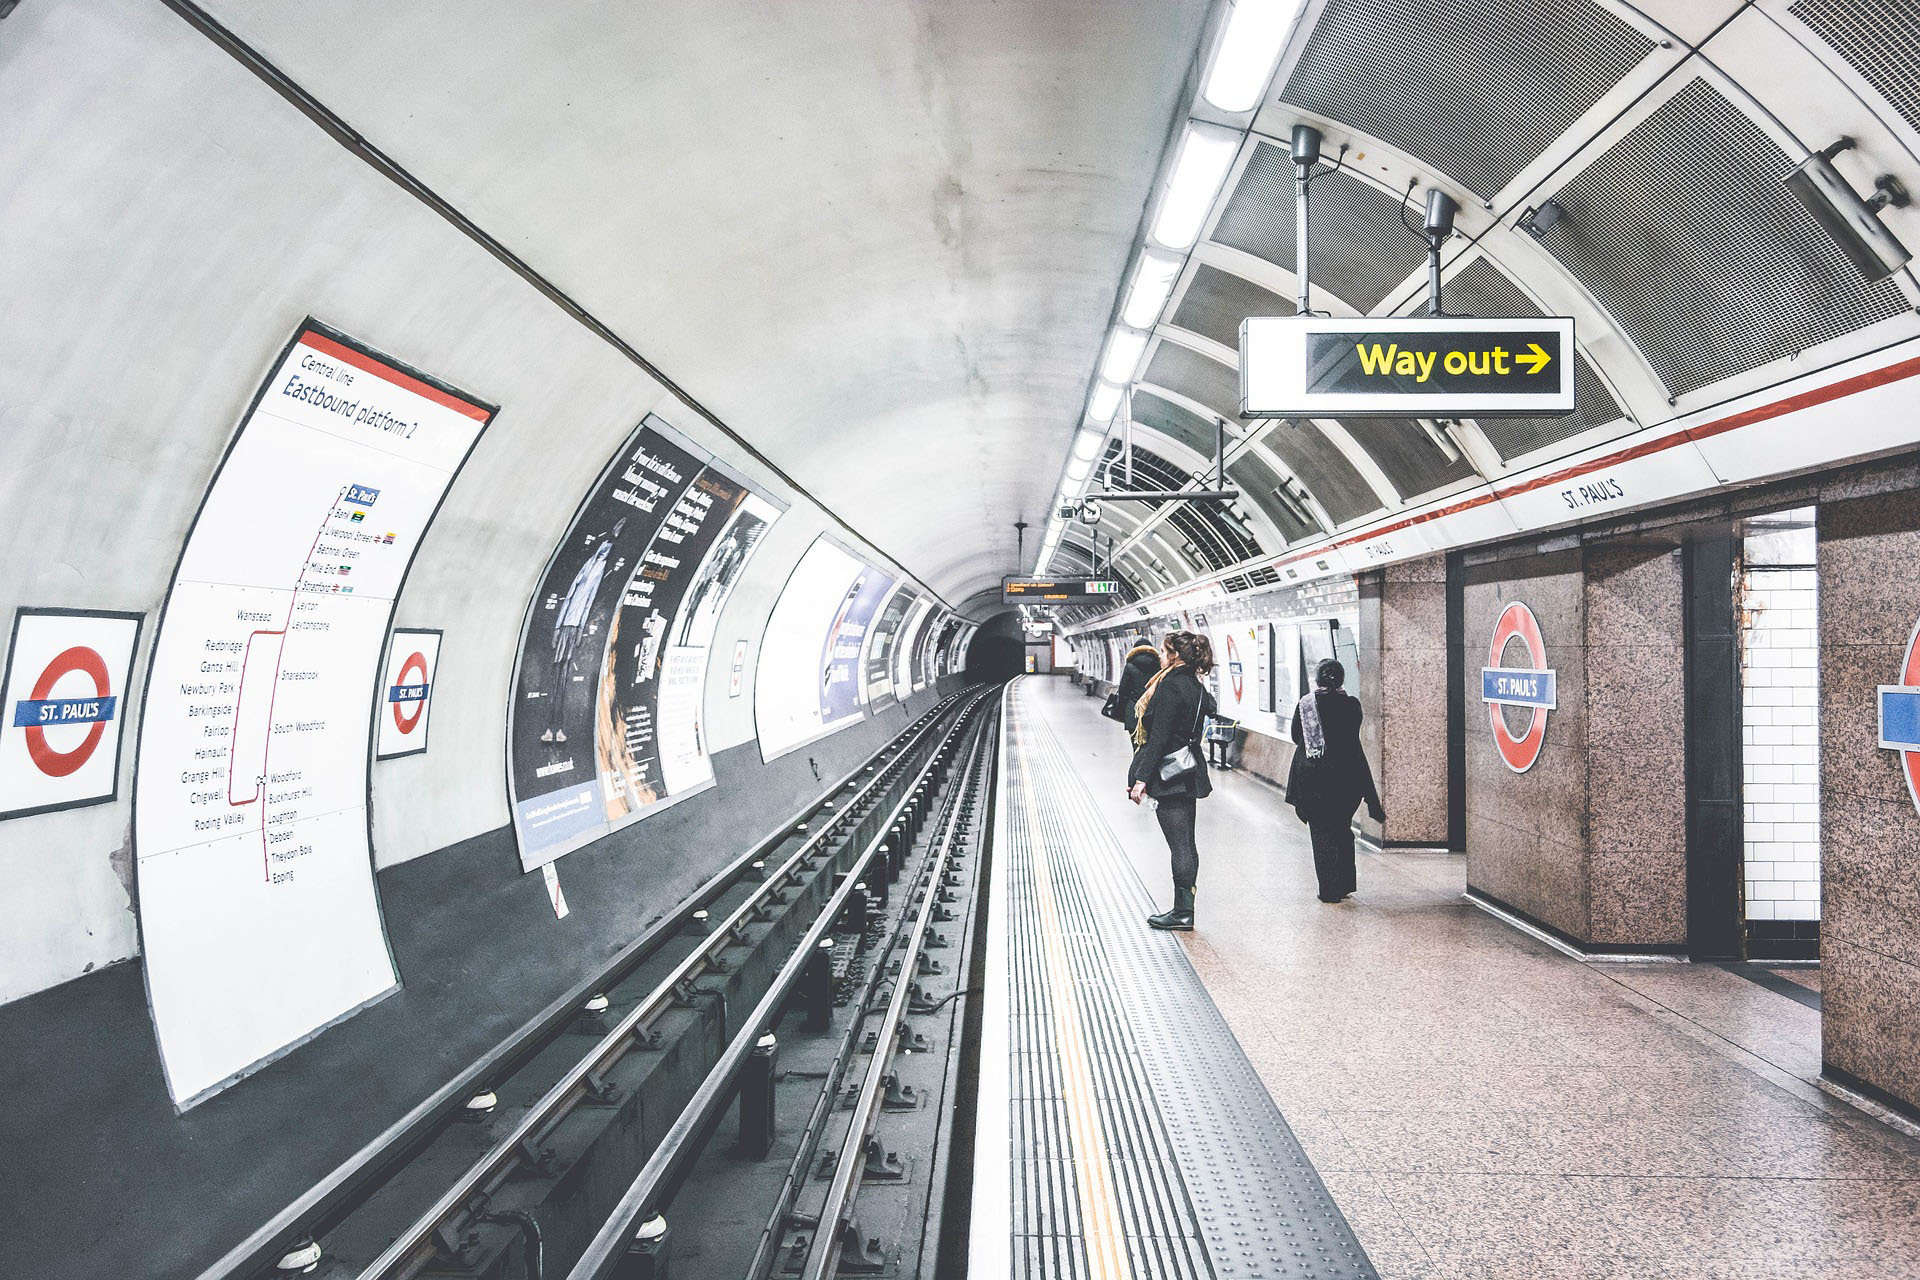 A photo of a London Underground platform taken at the edge looking down the tracks